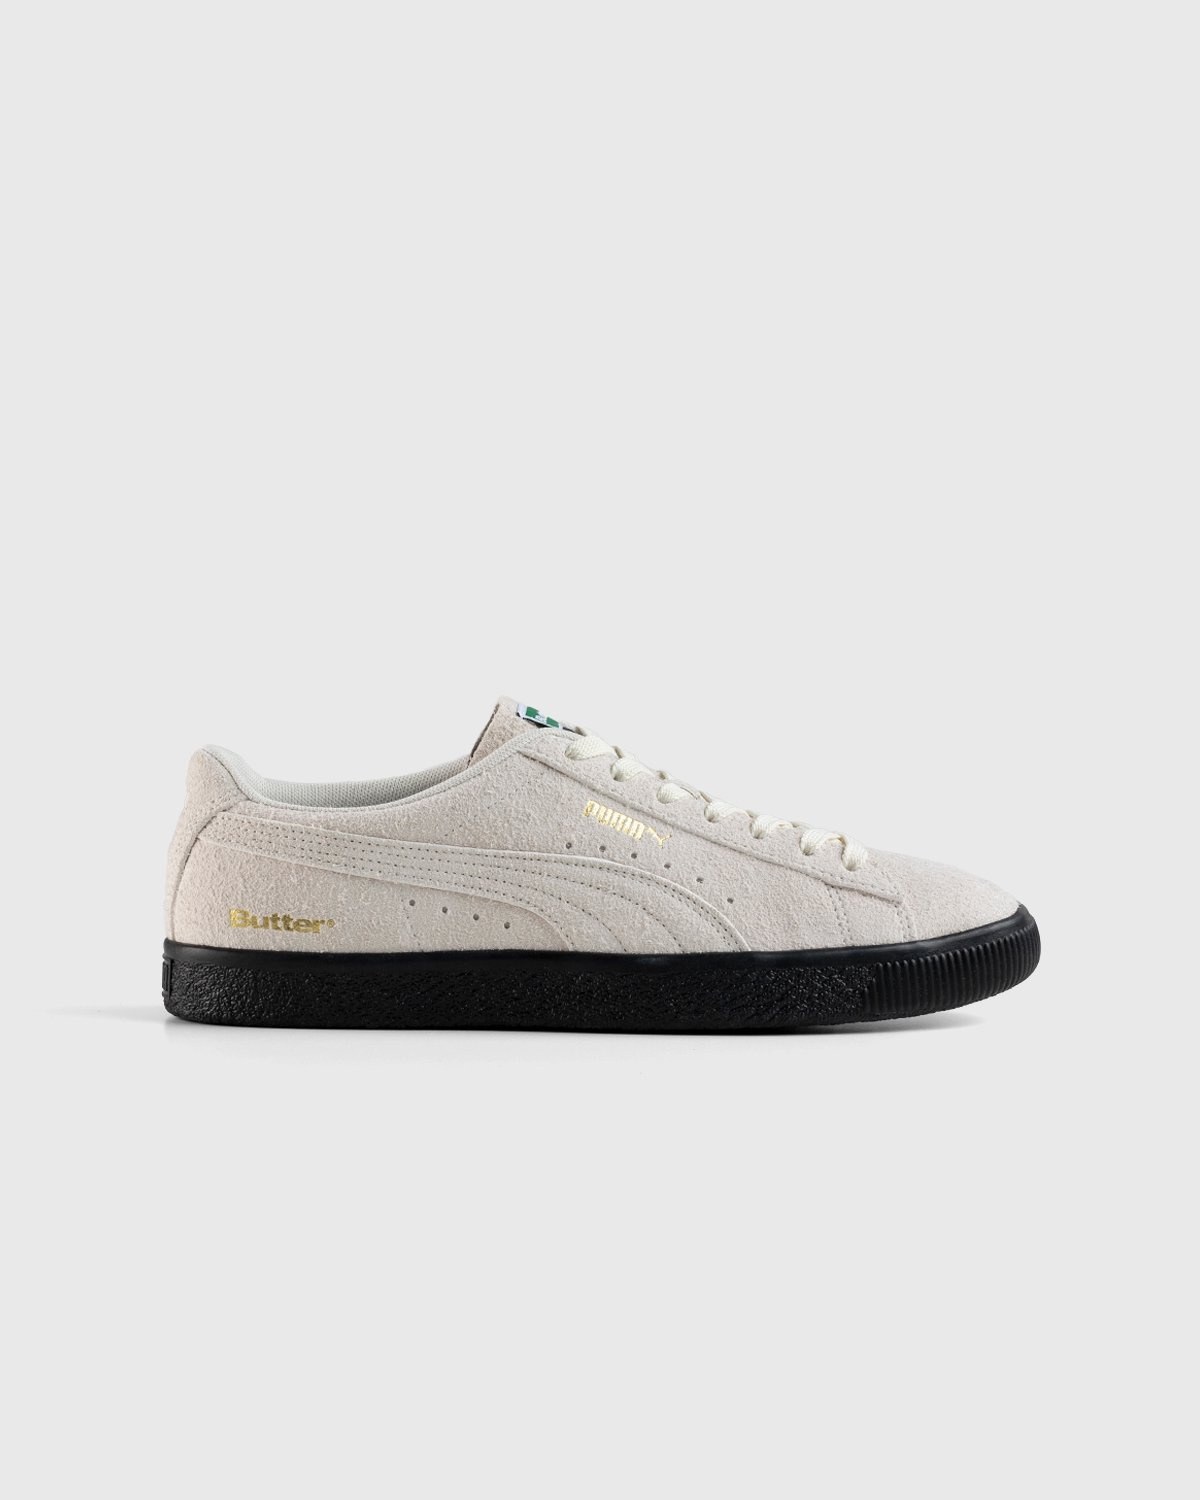 Puma x Butter Goods – Suede VTG Whisper White/Puma Black - Sneakers - Green - Image 1